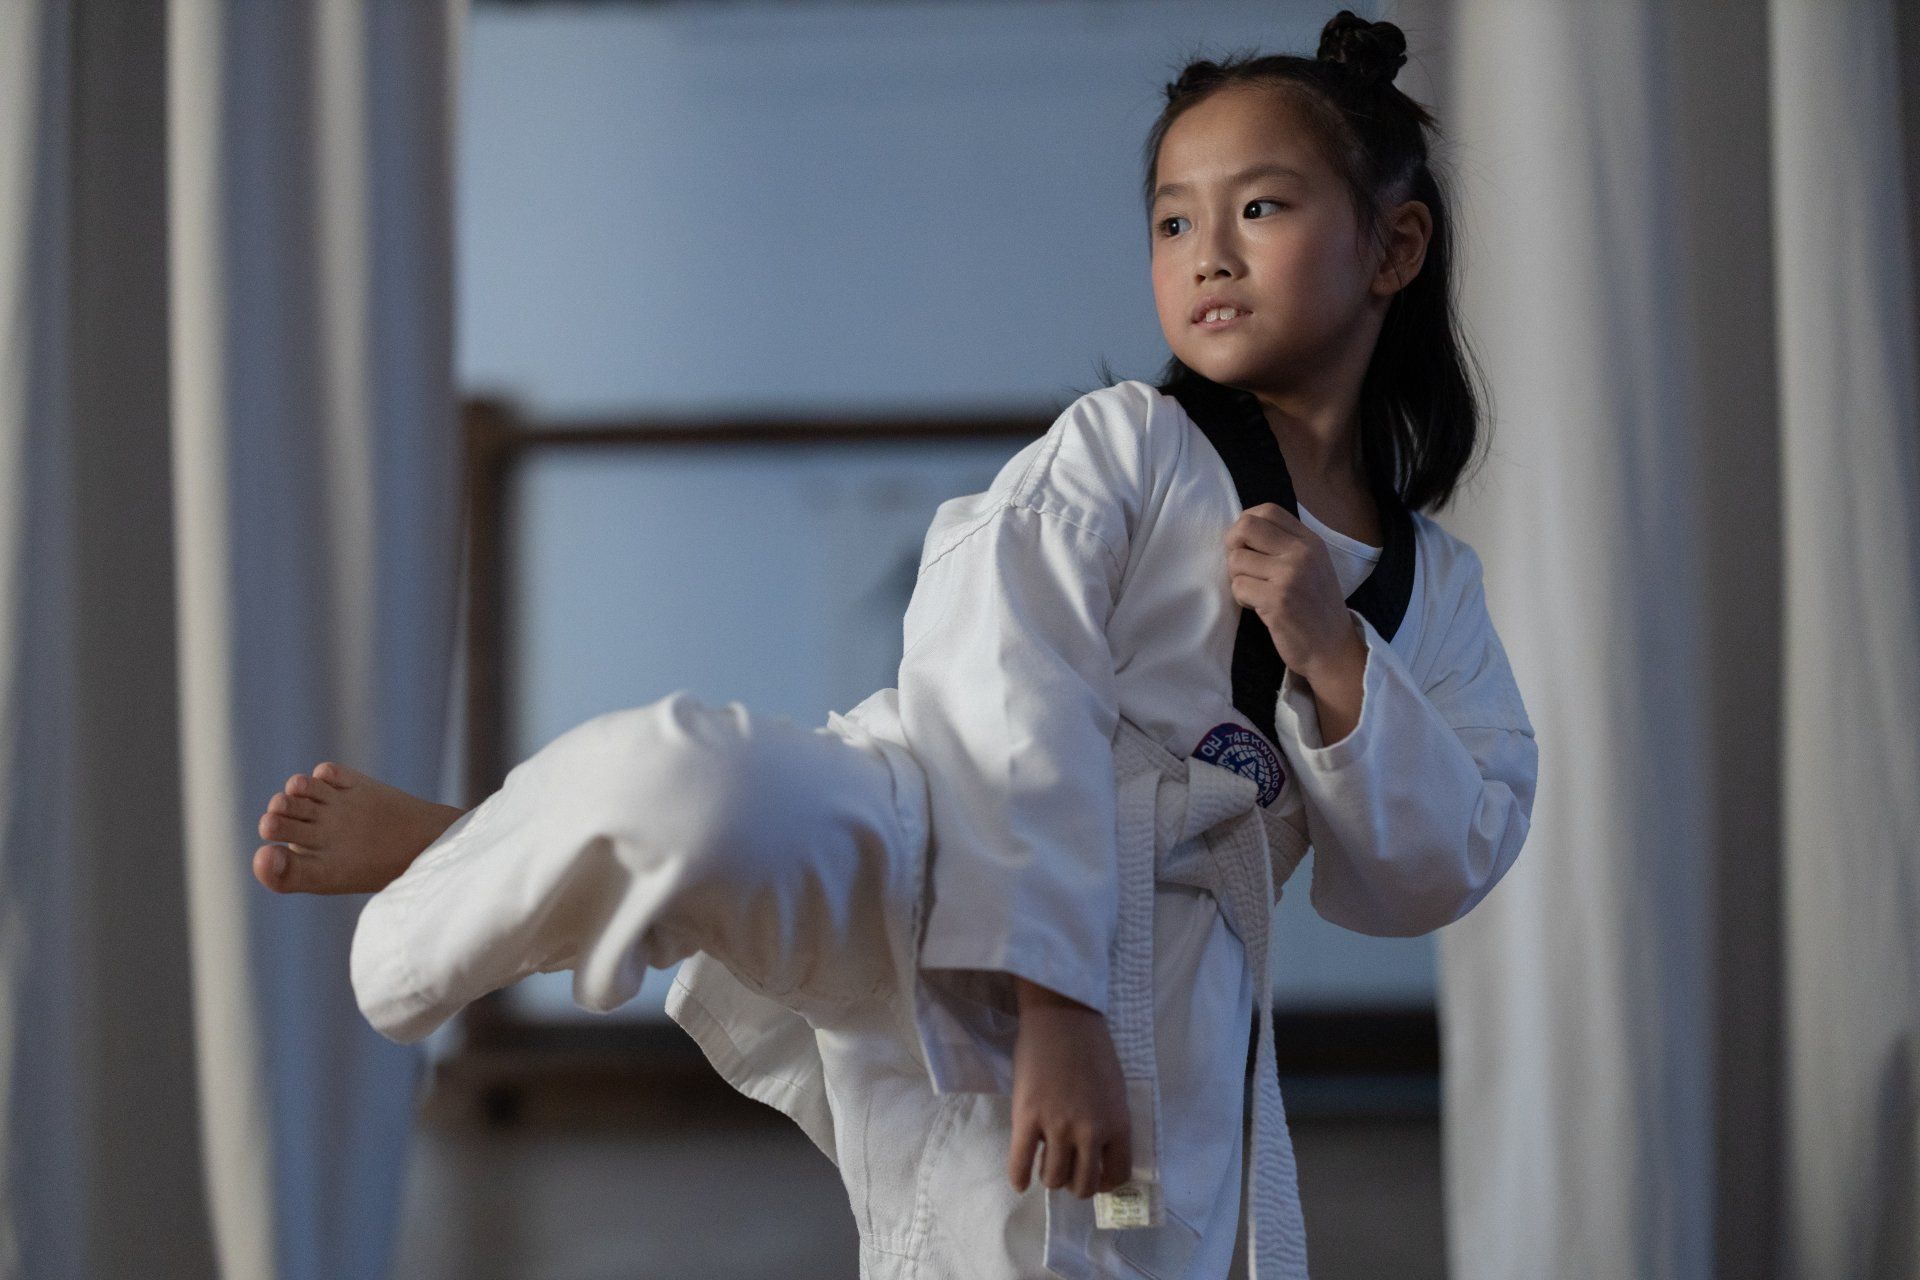 A young girl is practicing taekwondo in a gym.